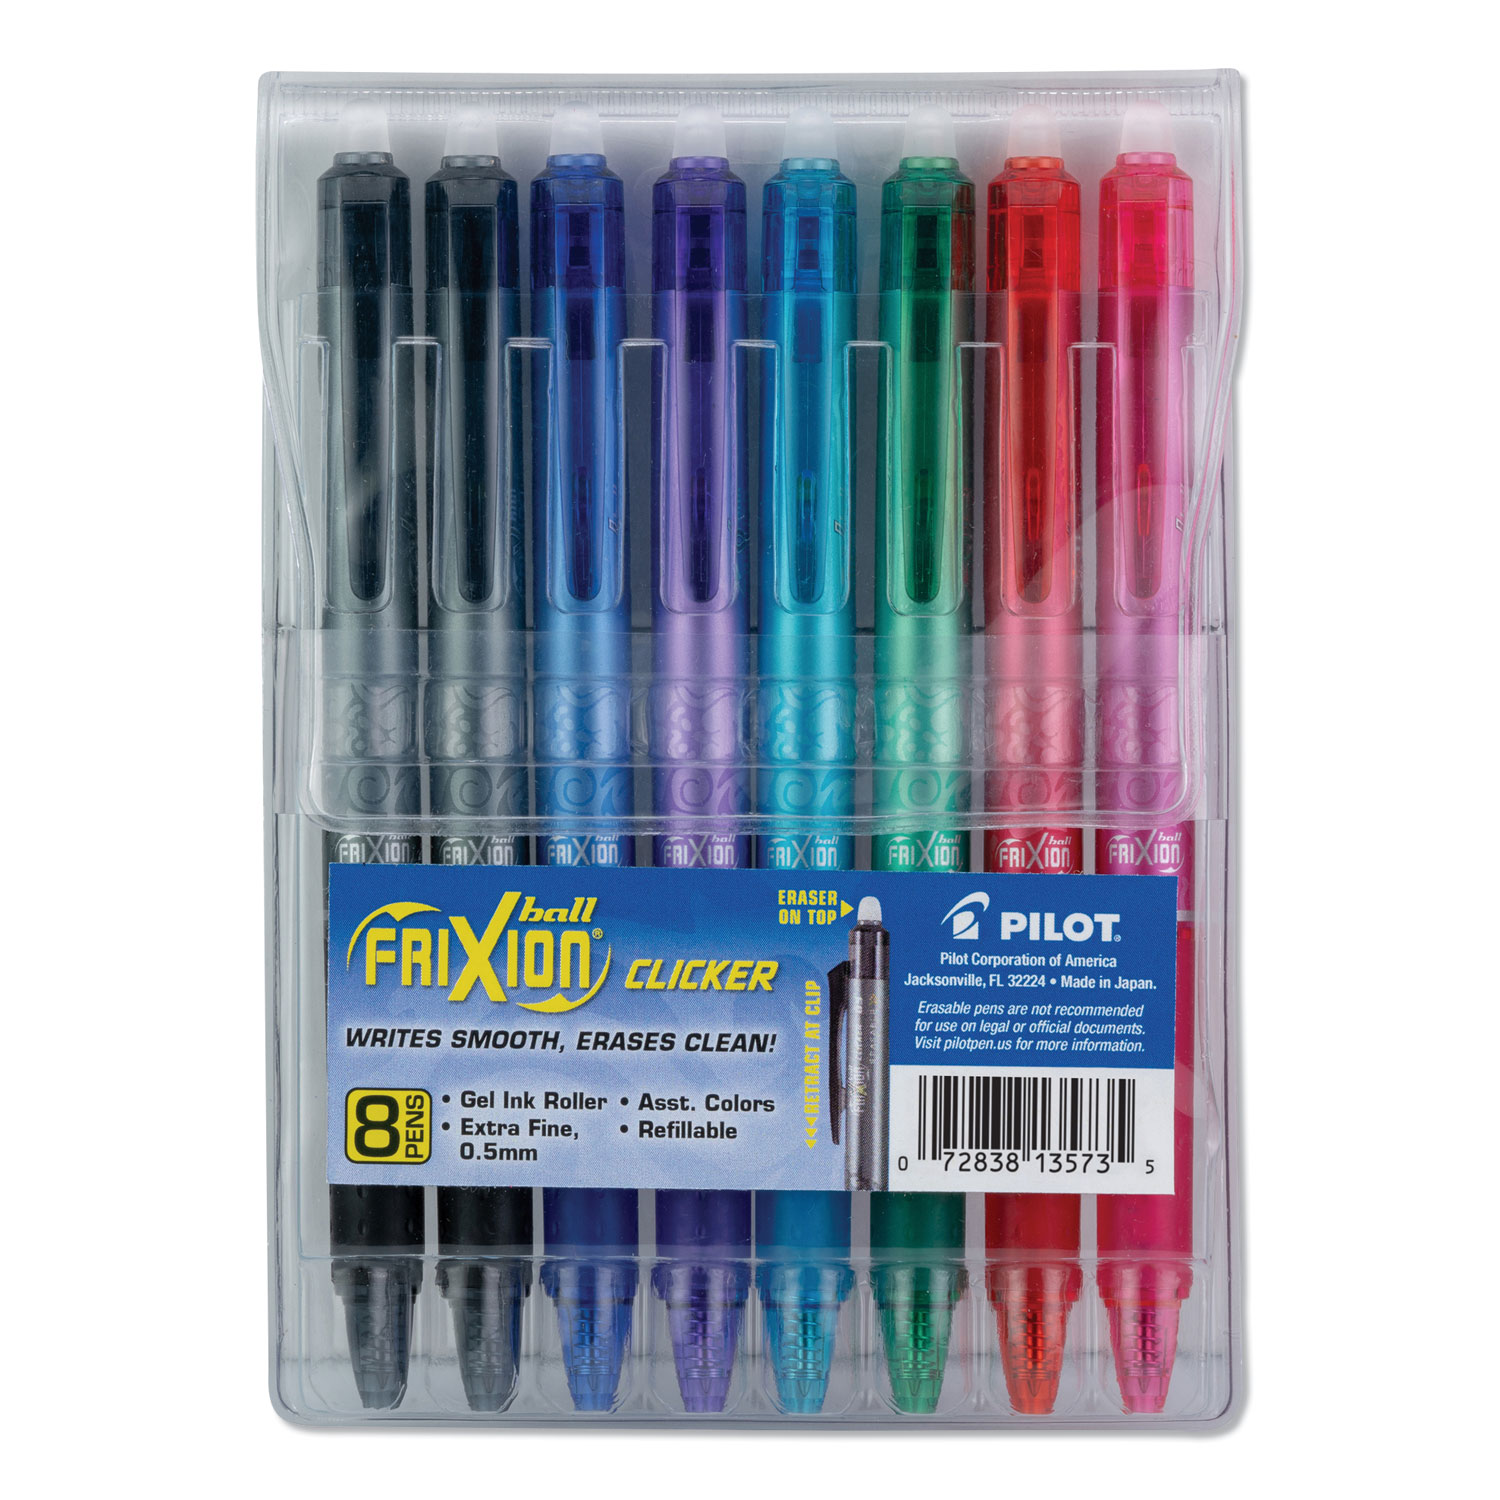 PILOT FriXion Point Erasable & Refillable Gel Ink Pens - 1 46524 Black/Blue/Red/Green/Pink/Purple Inks Extra Fine Point 6-Pack Pouch 